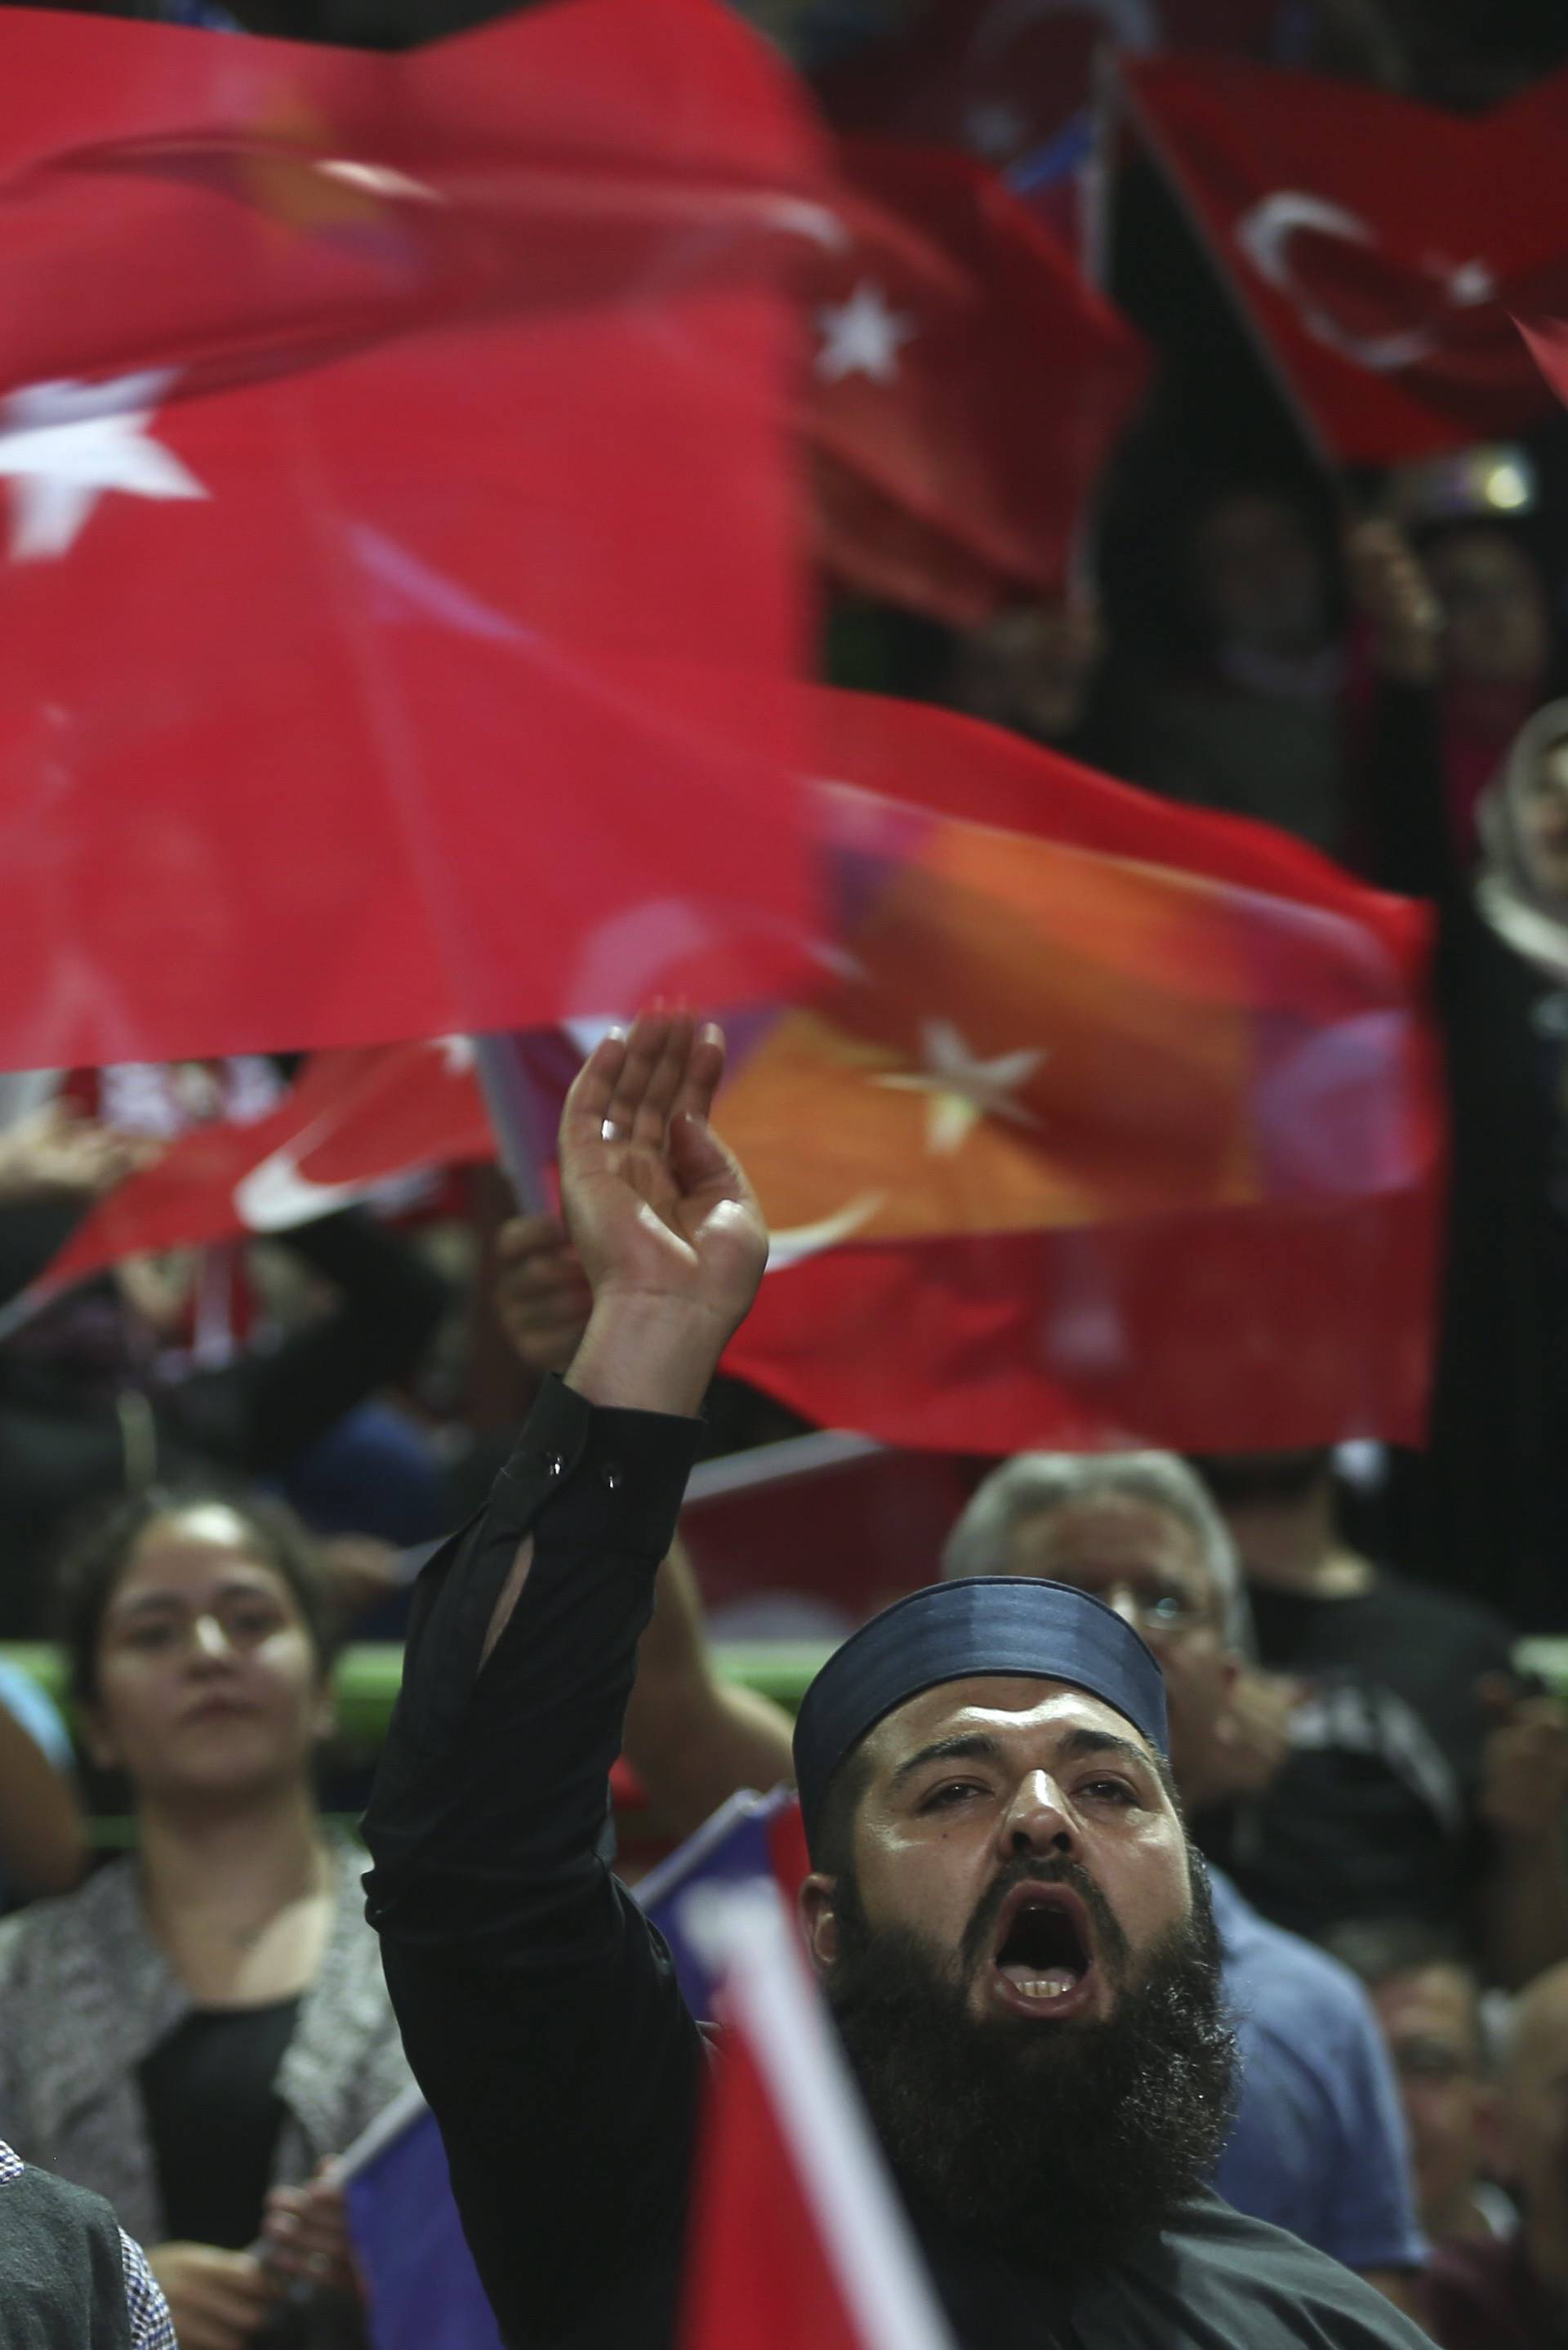 Supporters of Turkish President Erdogan attend a pre-election rally in Sarajevo